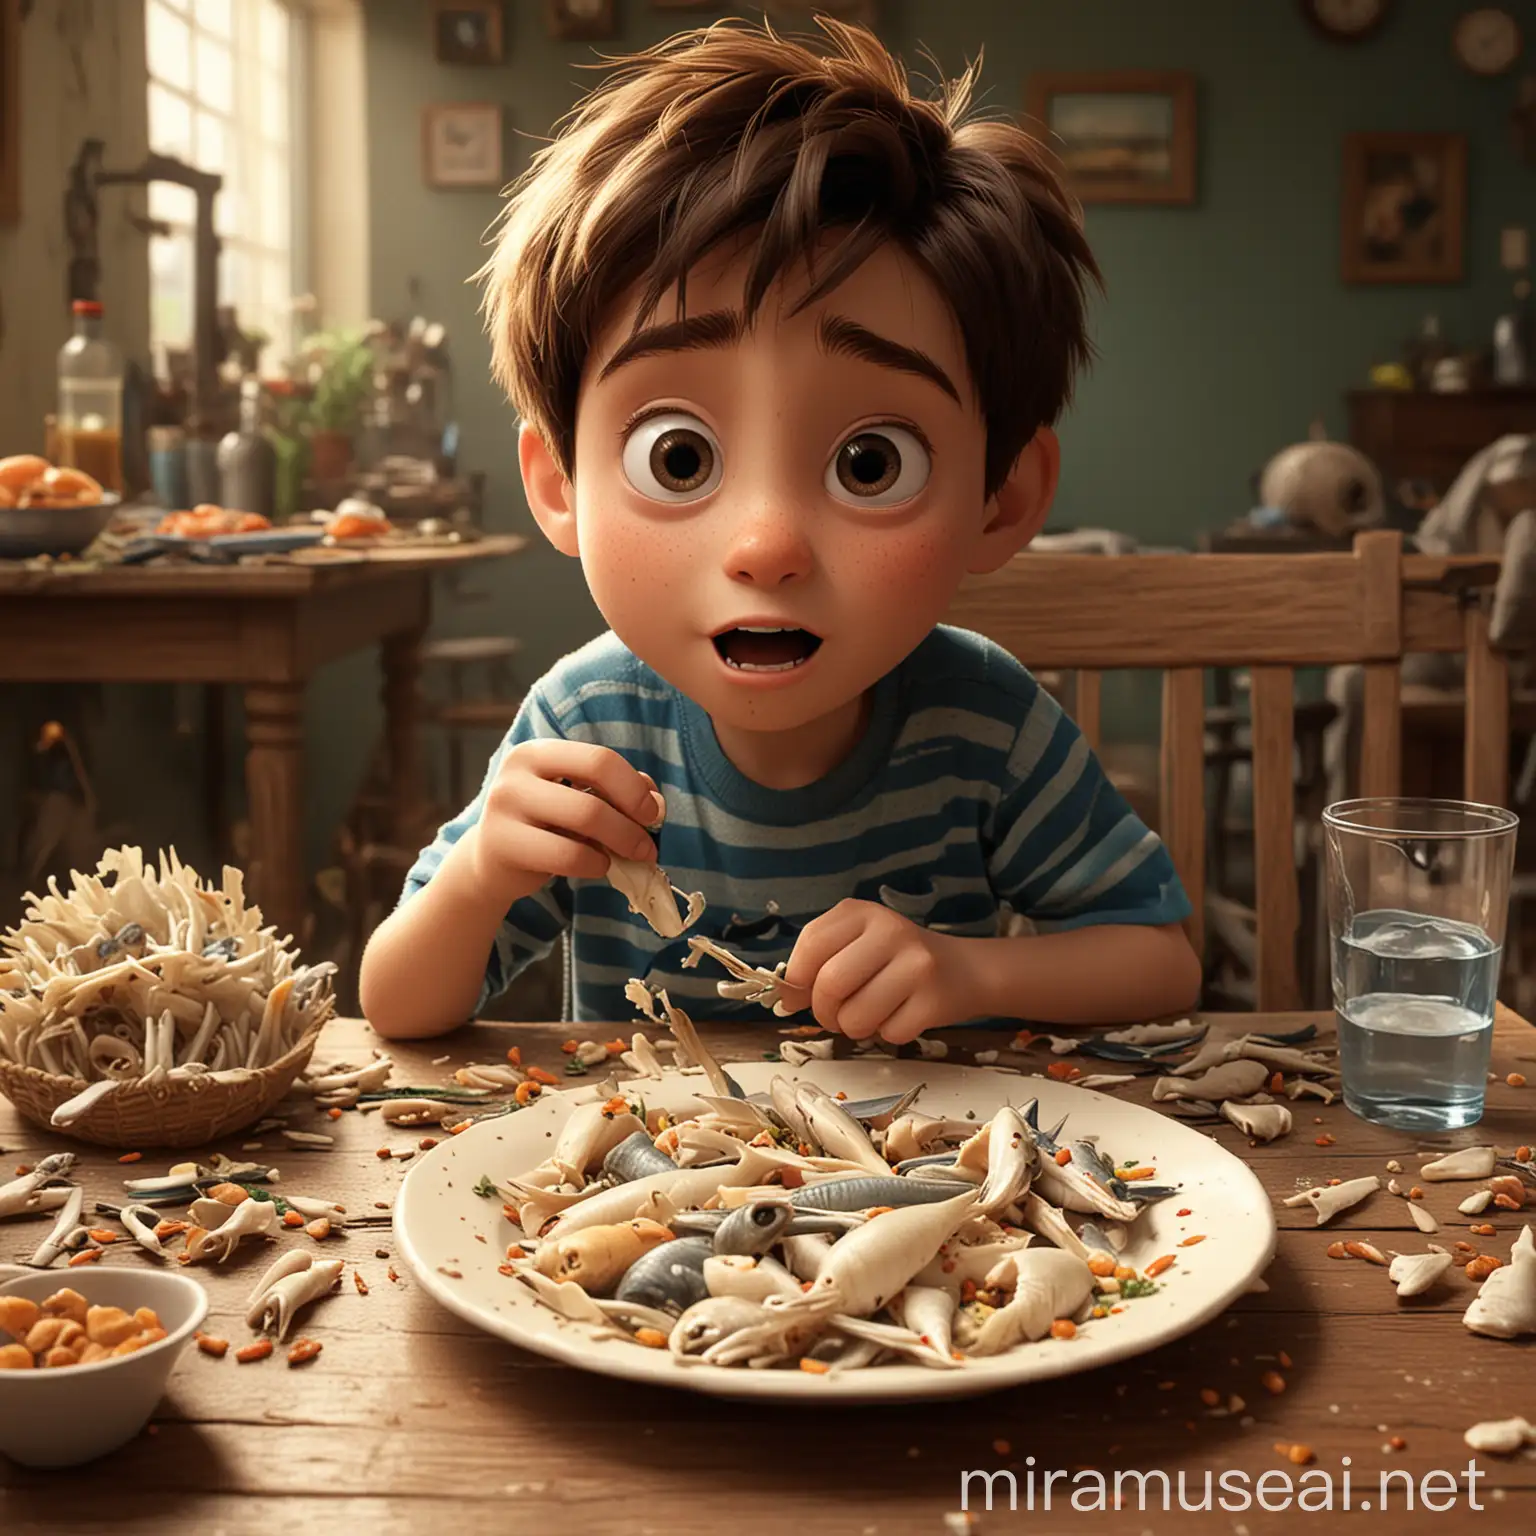 A boy is eating fish, and there are still fish bones all over the table，pixar style